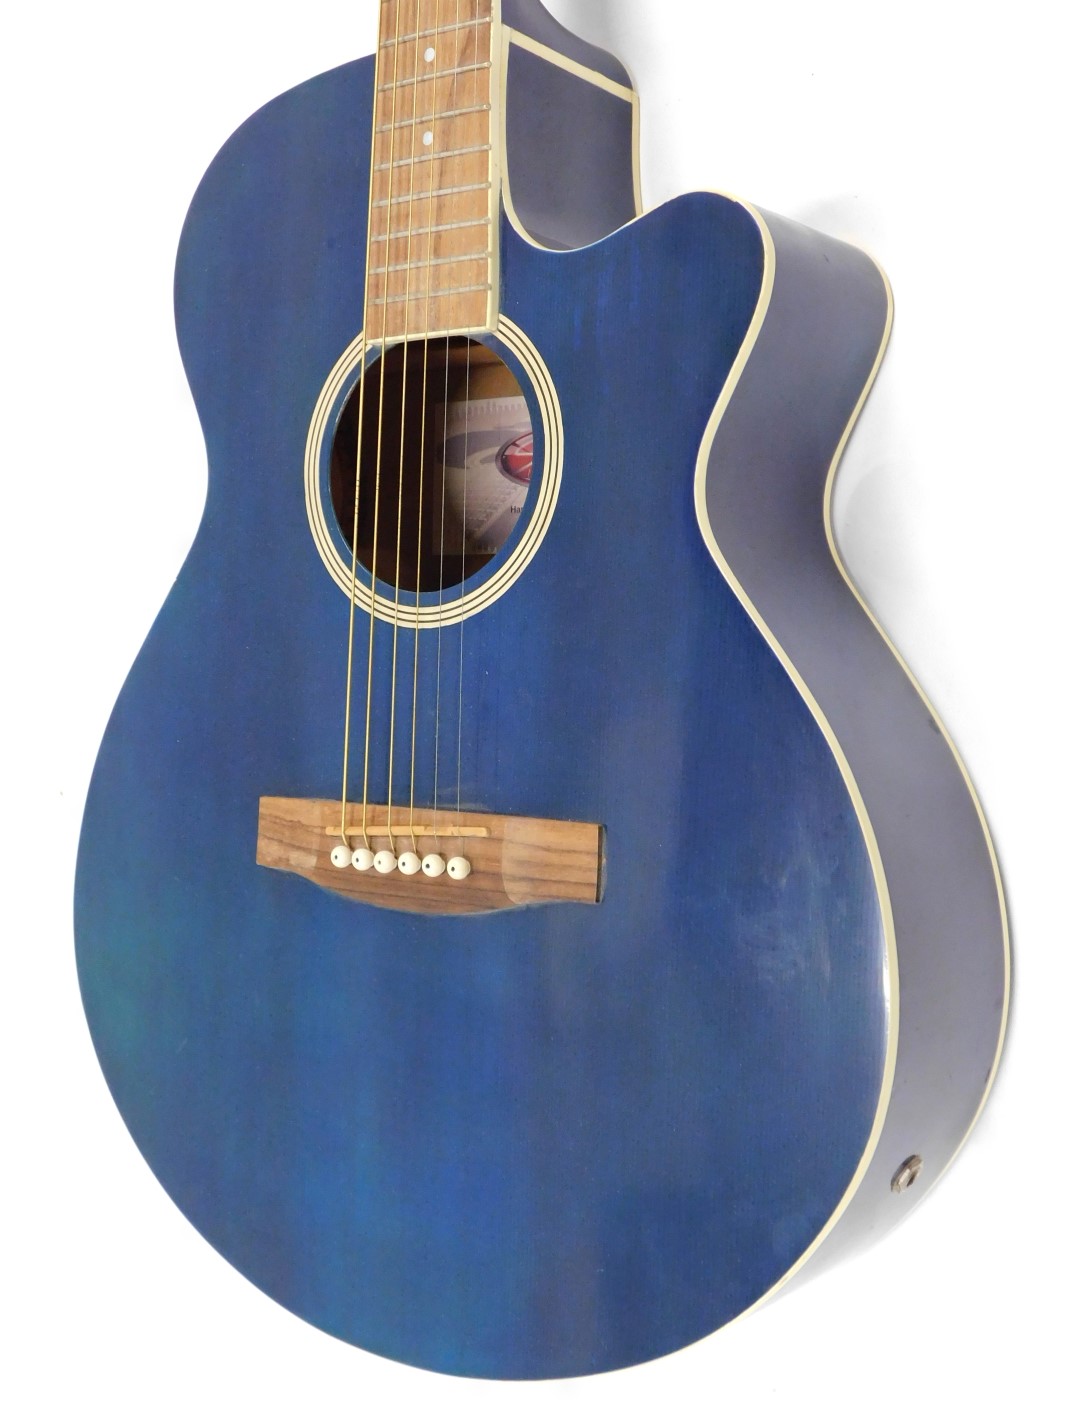 A Stagg handmade Western guitar, model number SW206CE-TB, in blue, 102cm long. - Image 4 of 7